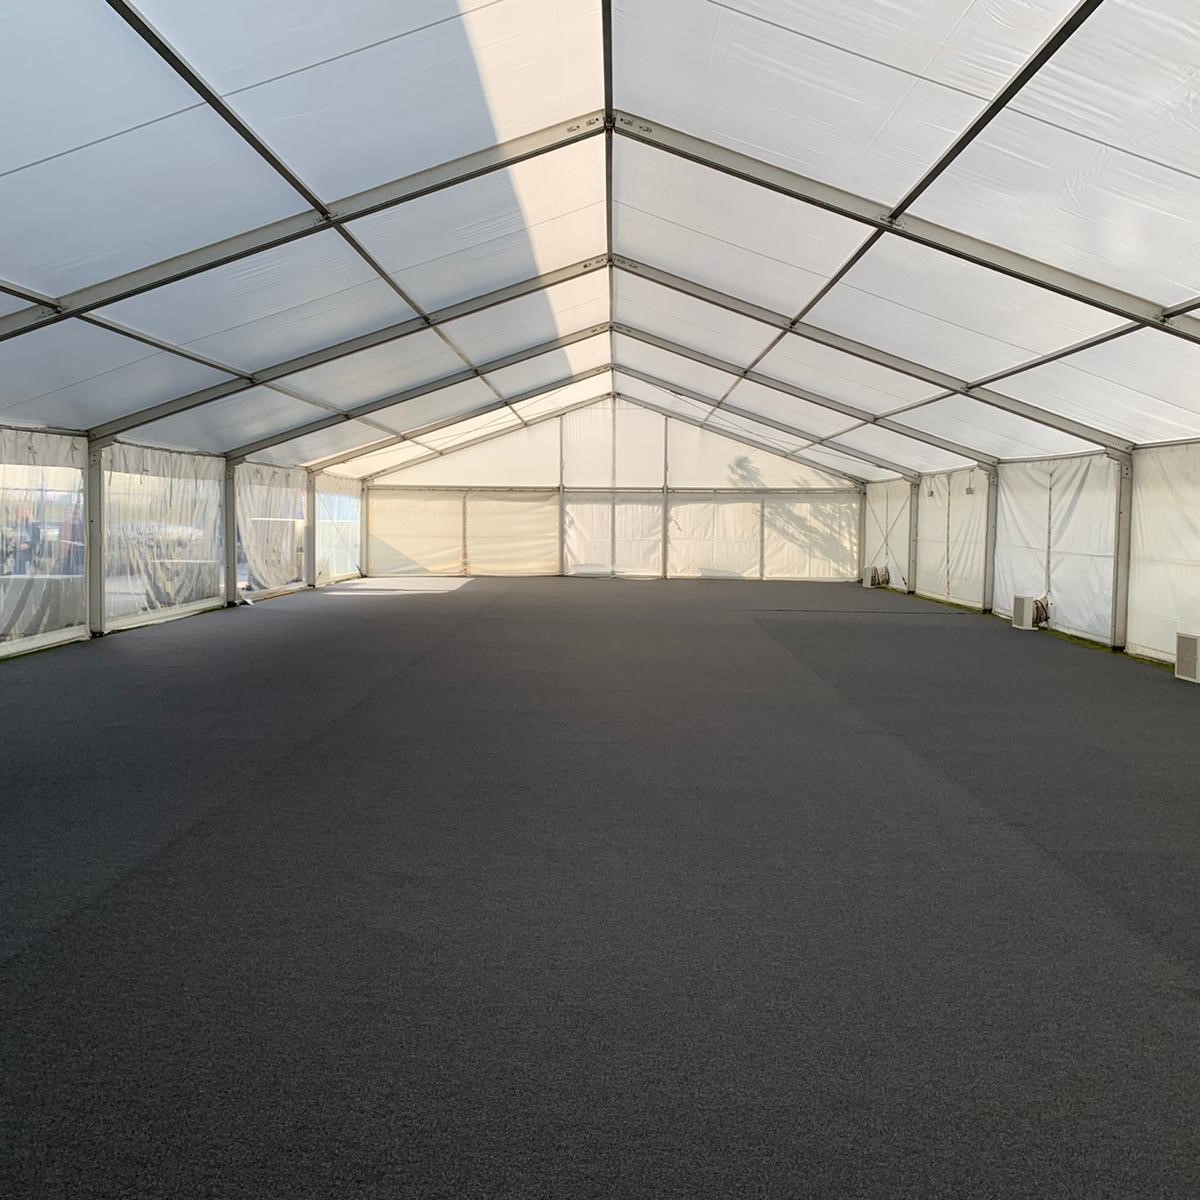 Film set crew catering marquee with carpet and heating